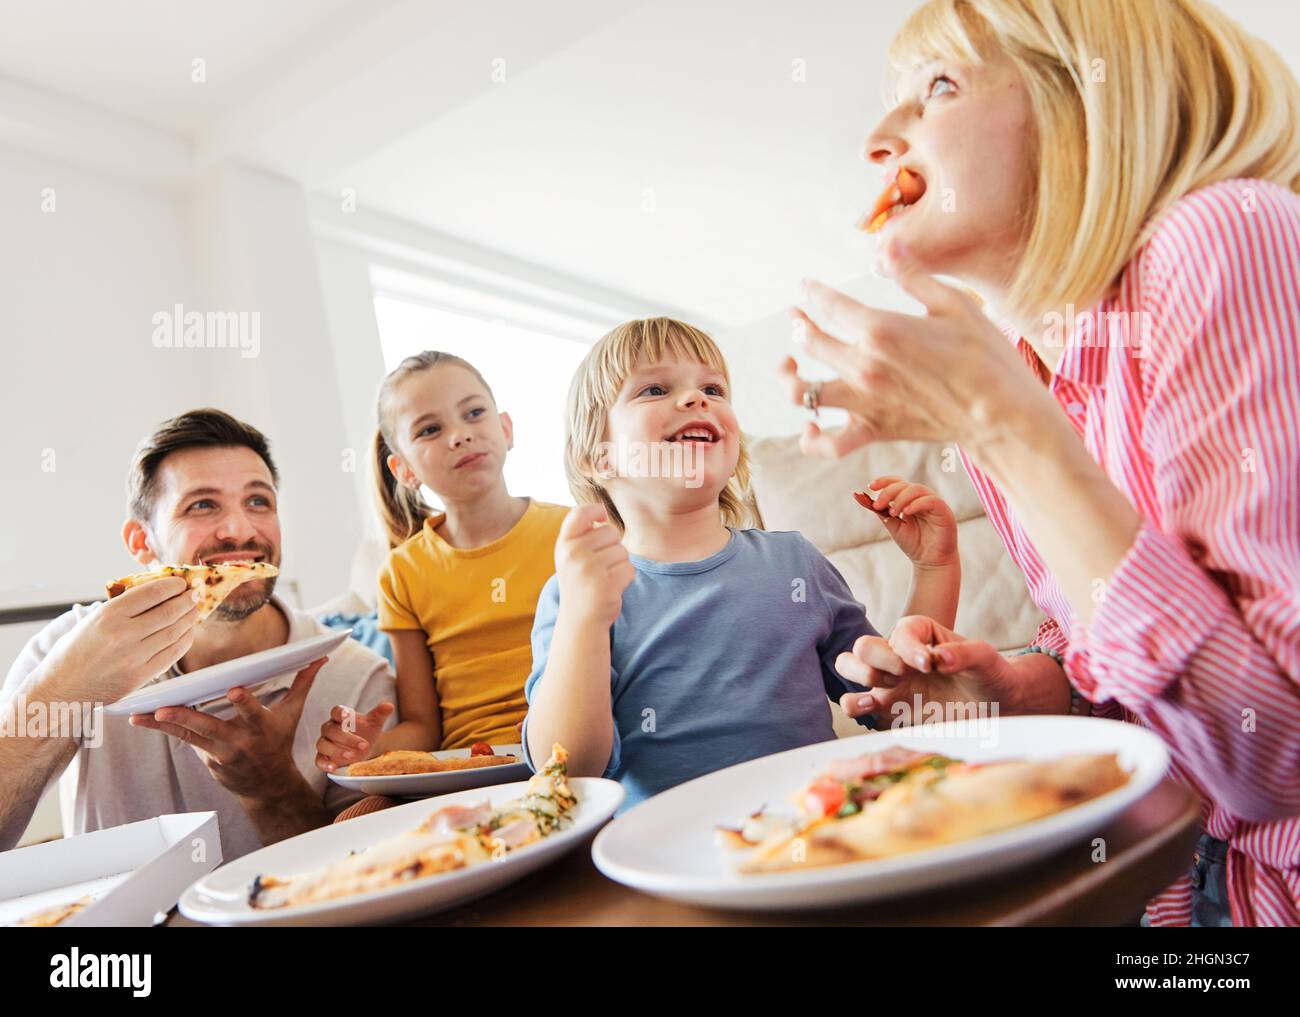 pizza family child food home eating son daughter mother father happy meal together lunch dinner man woman boy girl fun Stock Photo